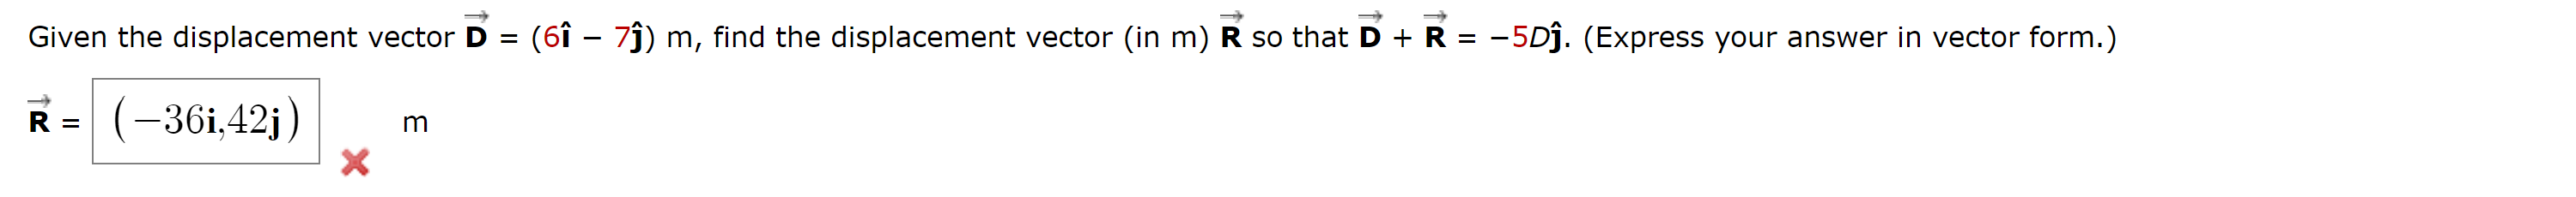 Given the displacement vector D = (6  7) m, find the displacement vector (in m) R so that D + R = 5D.